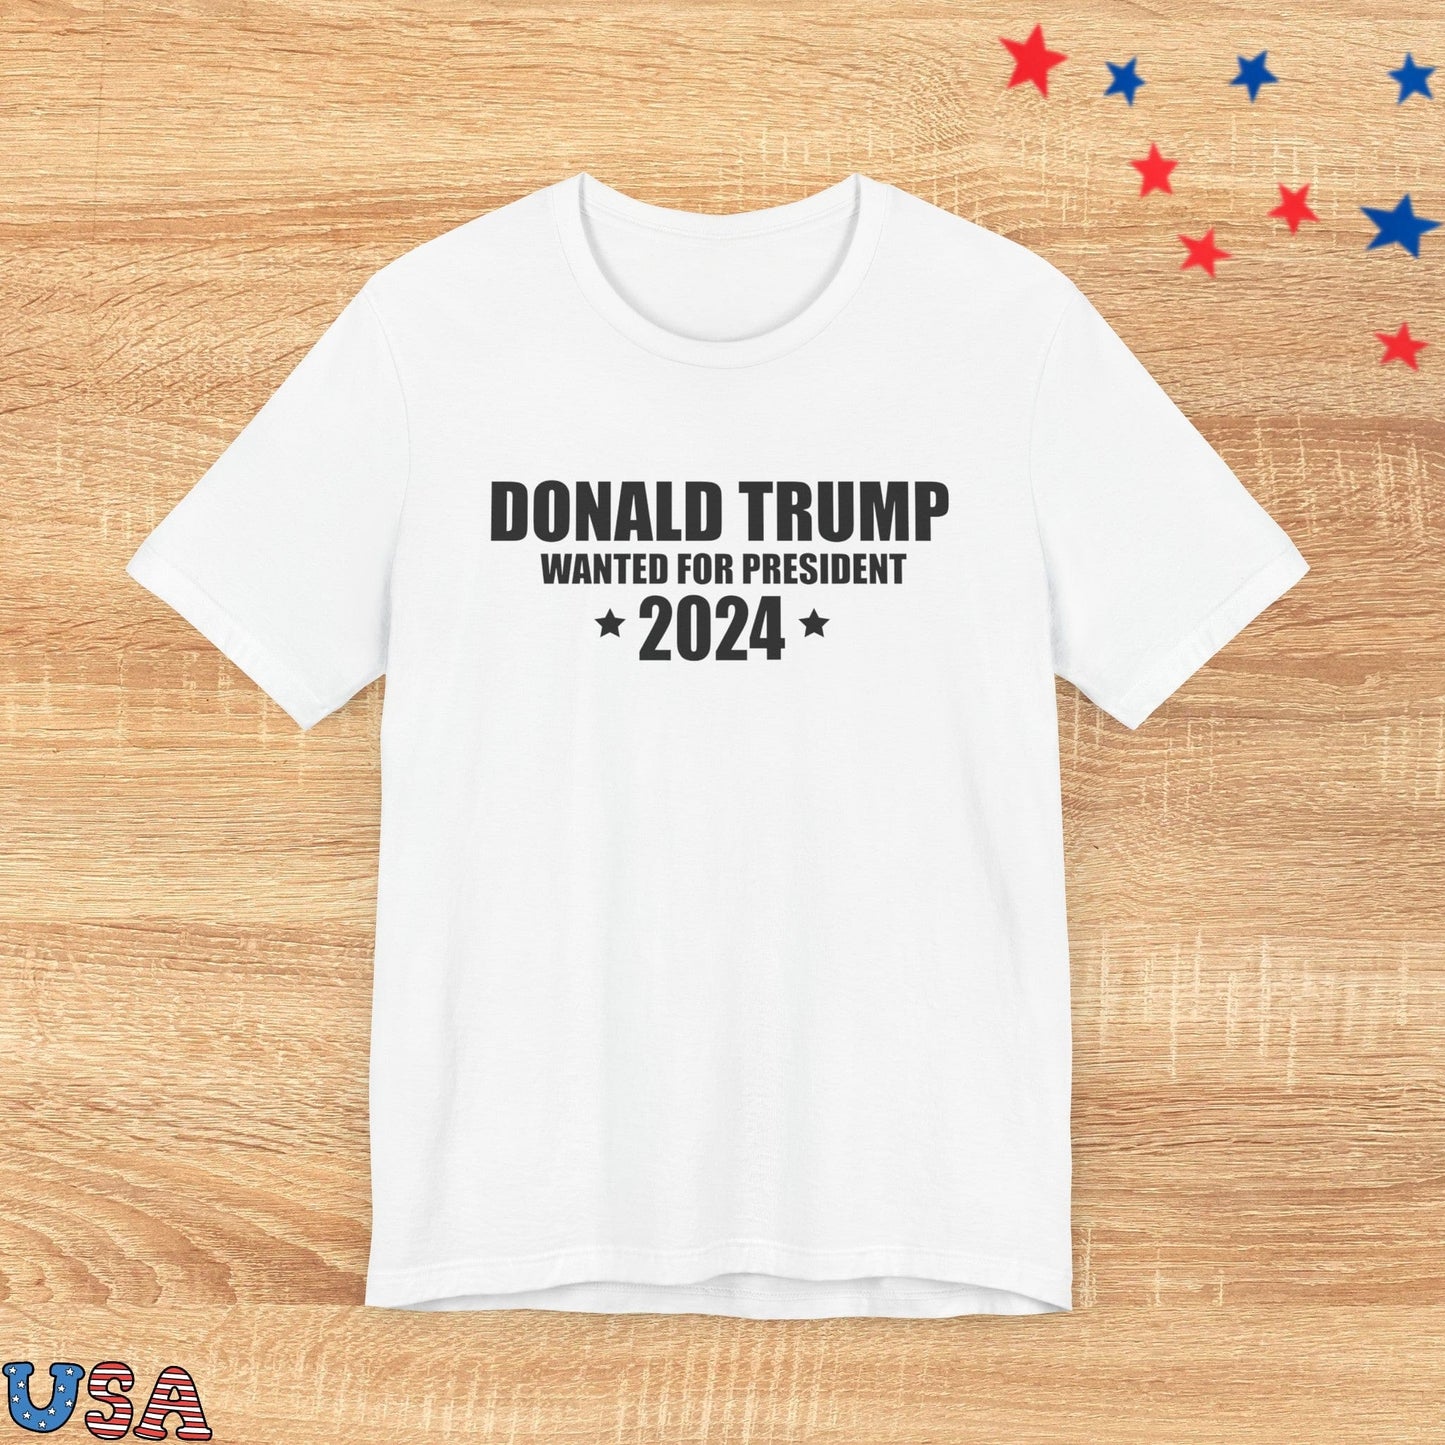 patriotic stars T-Shirt White / S Donald Trump Wanted For President 2024